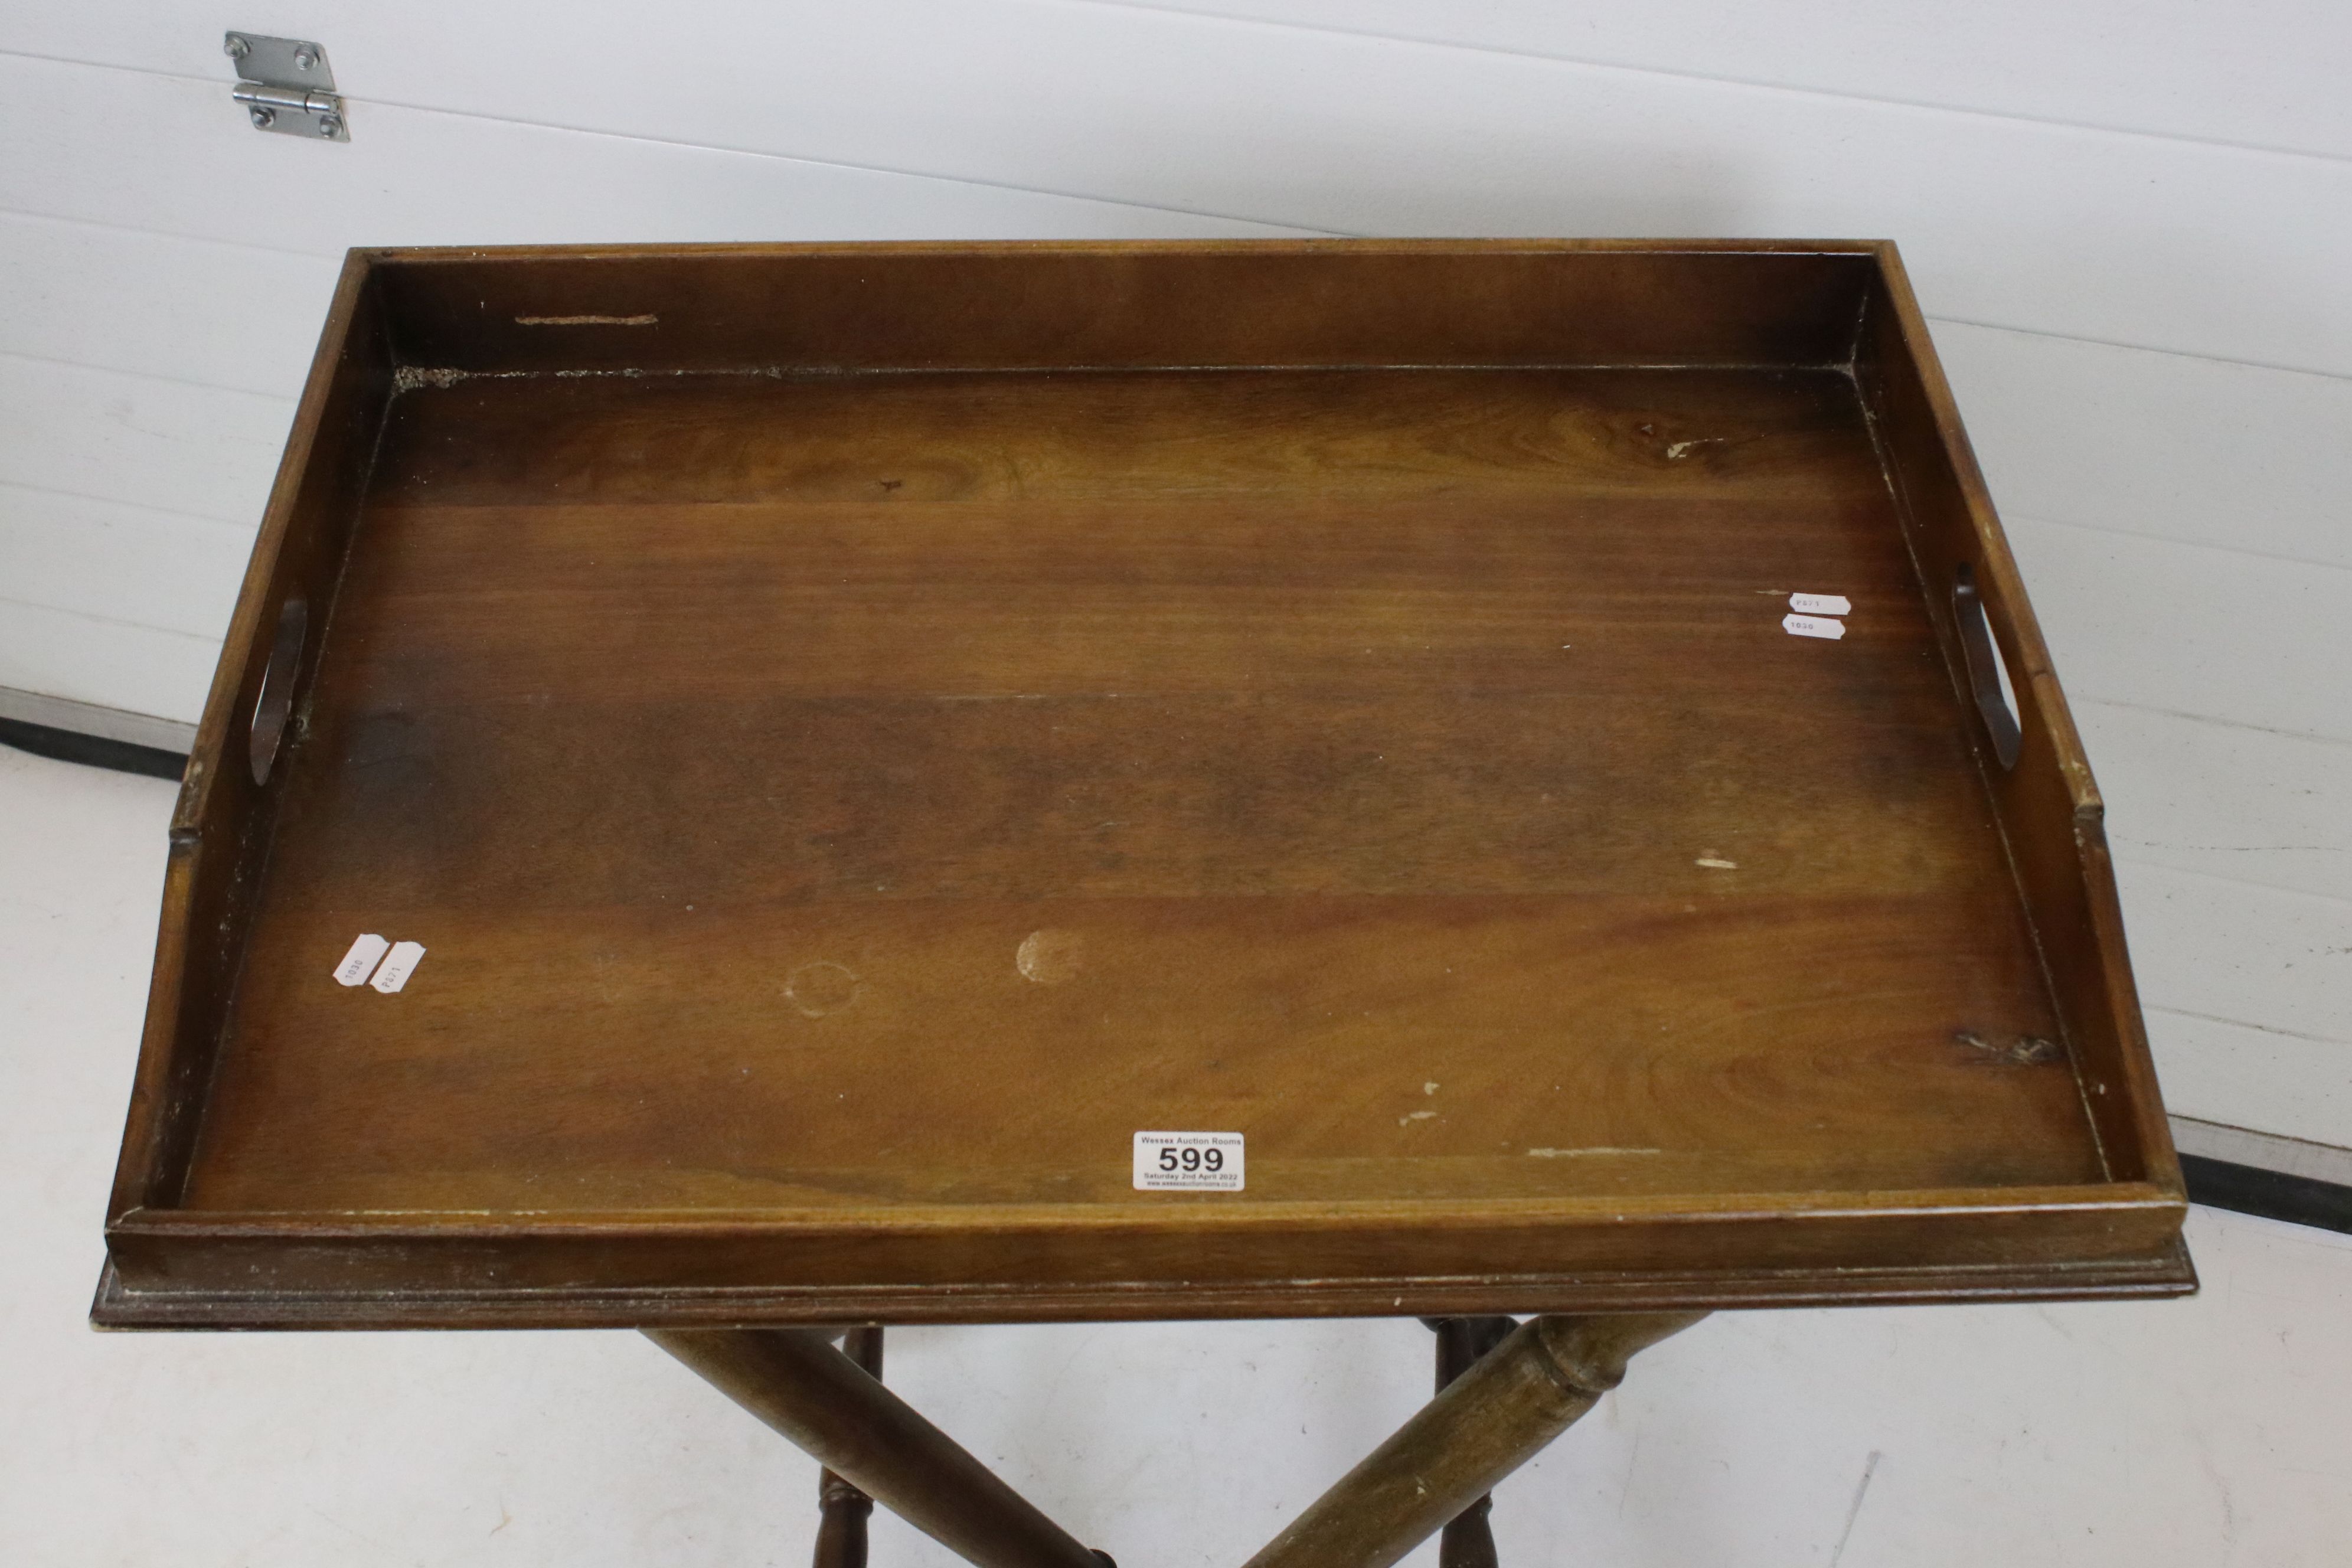 19th century style Mahogany Butlers Tray on Folding Stand, 70cm wide x 54cm deep x 81cm high - Image 2 of 5